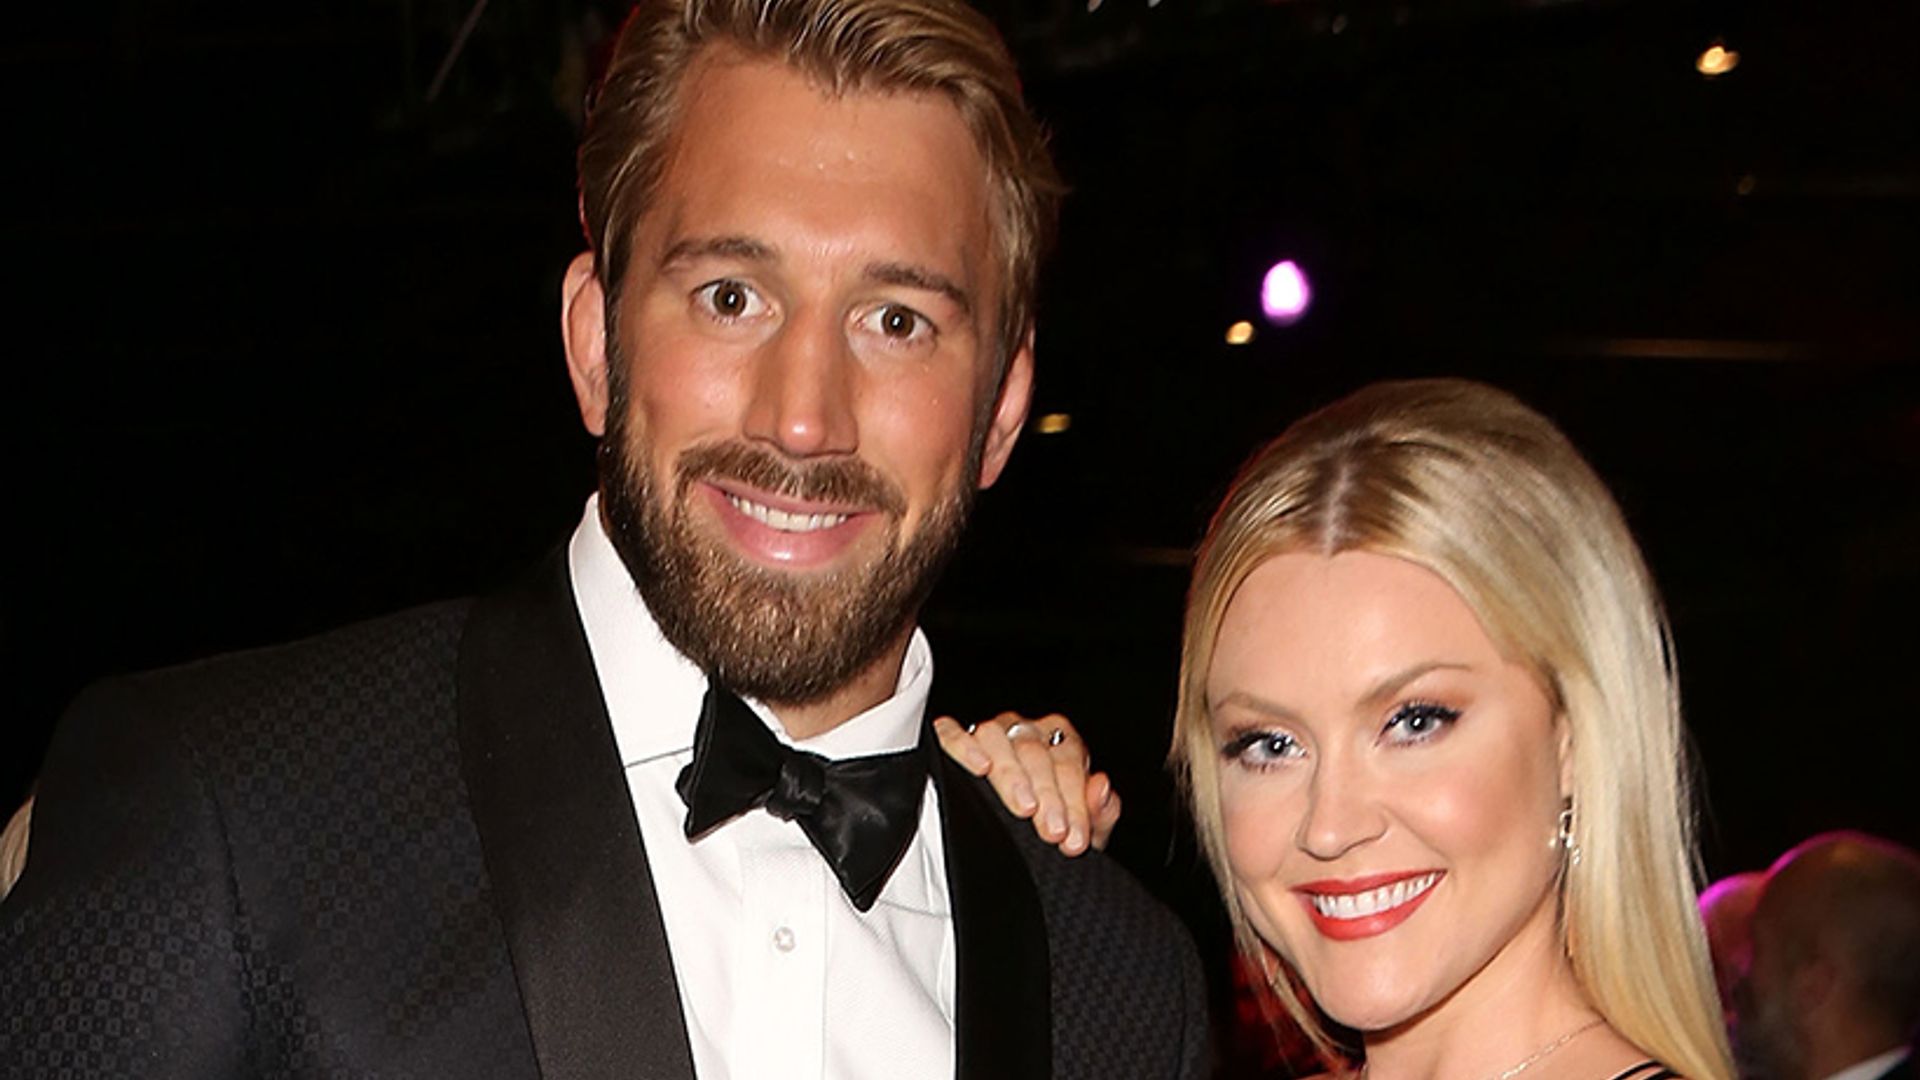 Exclusive! Singer Camilla Kerslake and Chris Robshaw reveal why they kept their engagement secret